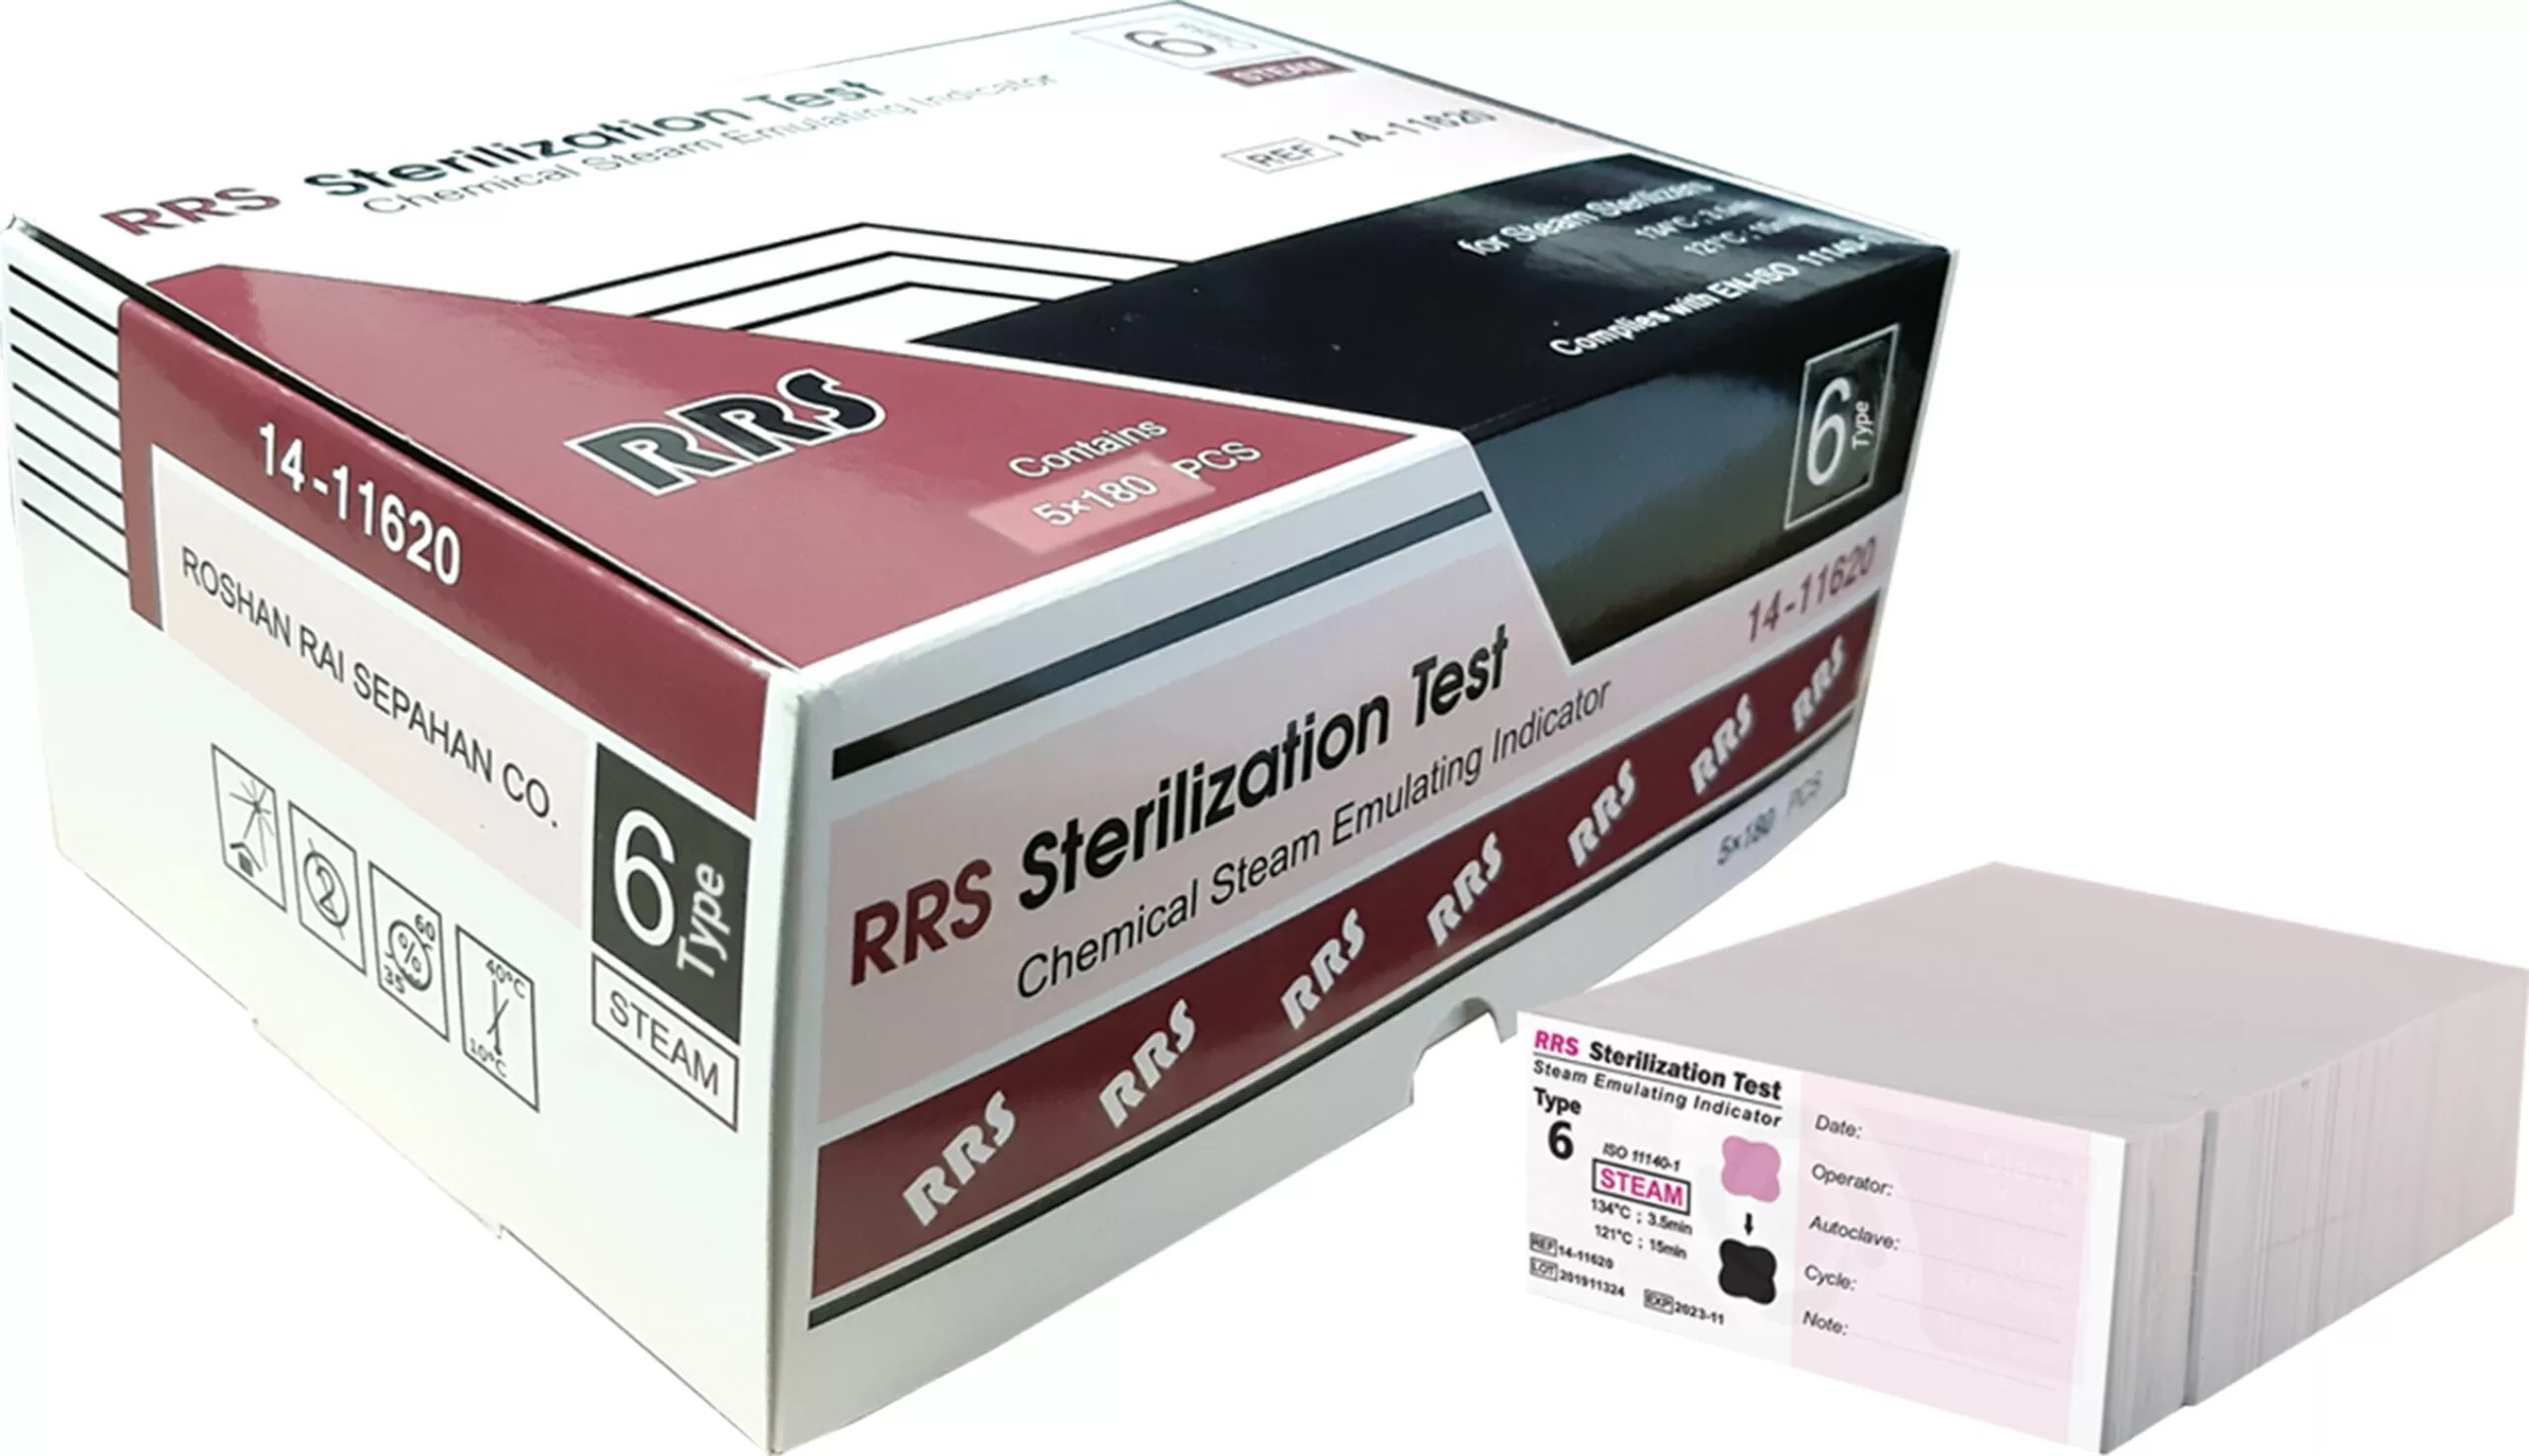 Steam Chemical Indicator Type 6 (RRS 14-11620)